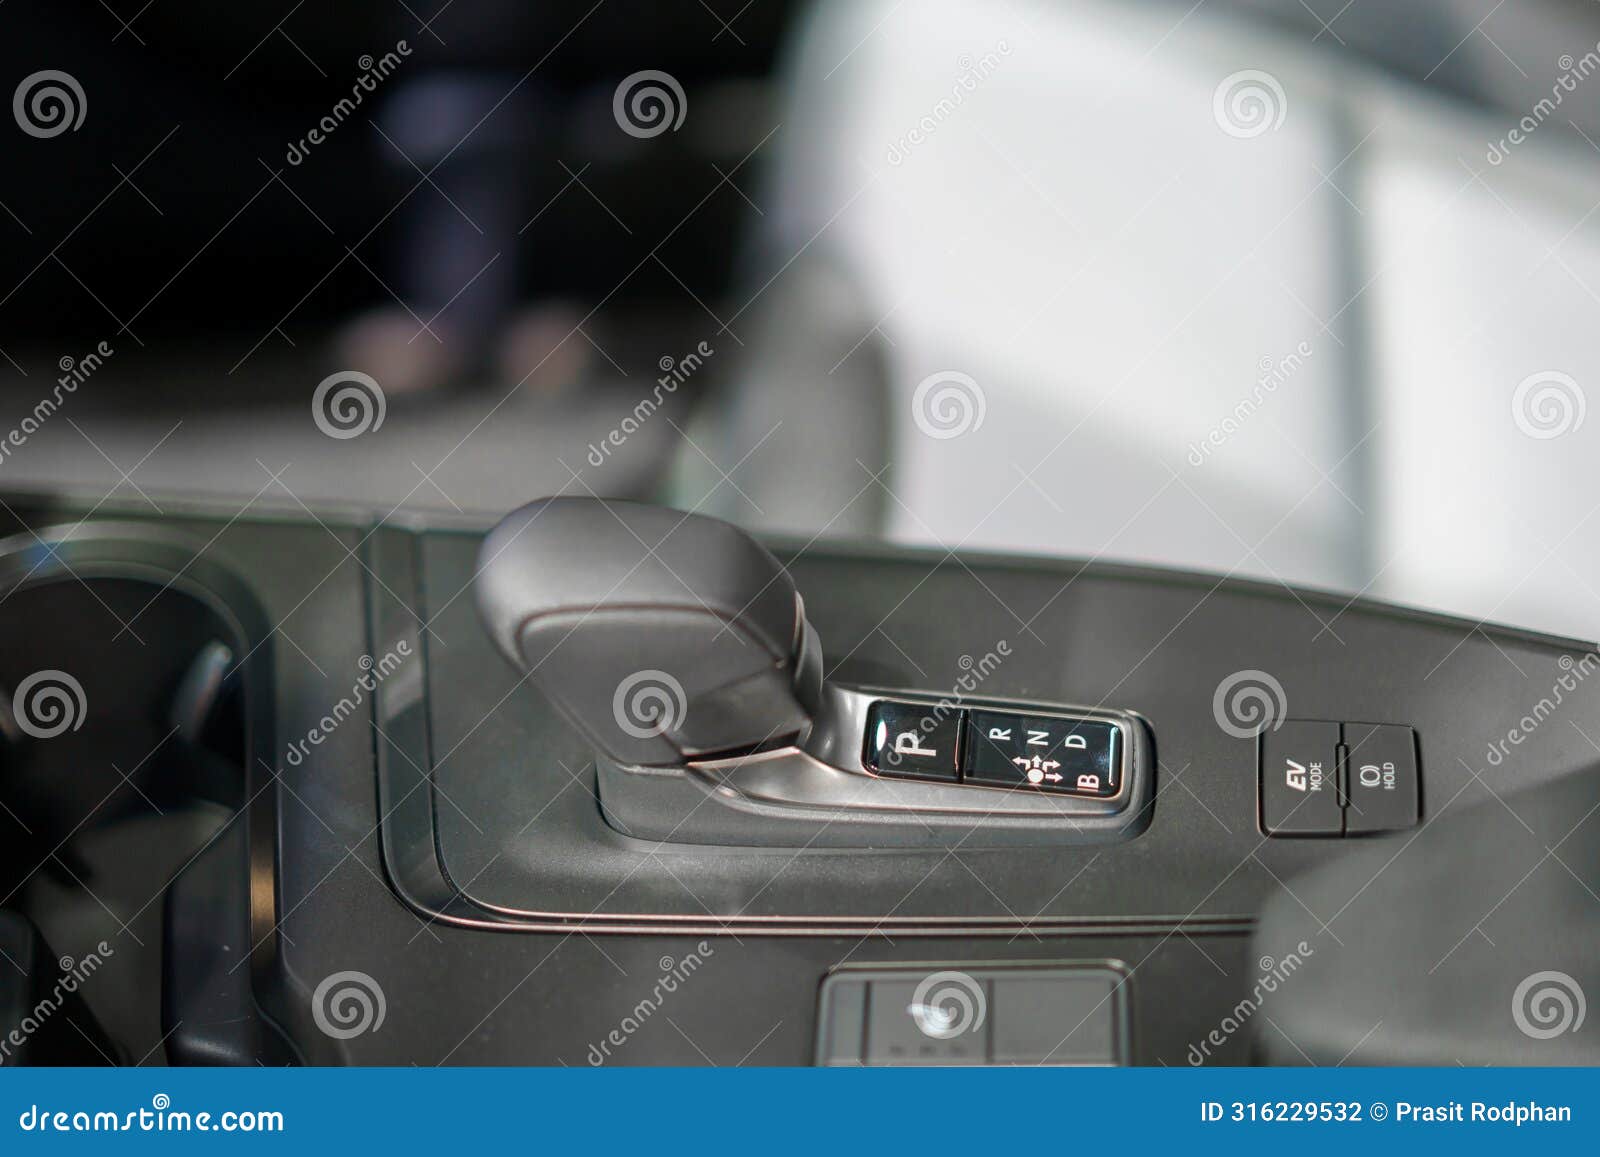 close up of modern car automatic gearbox and control buttons in ev car